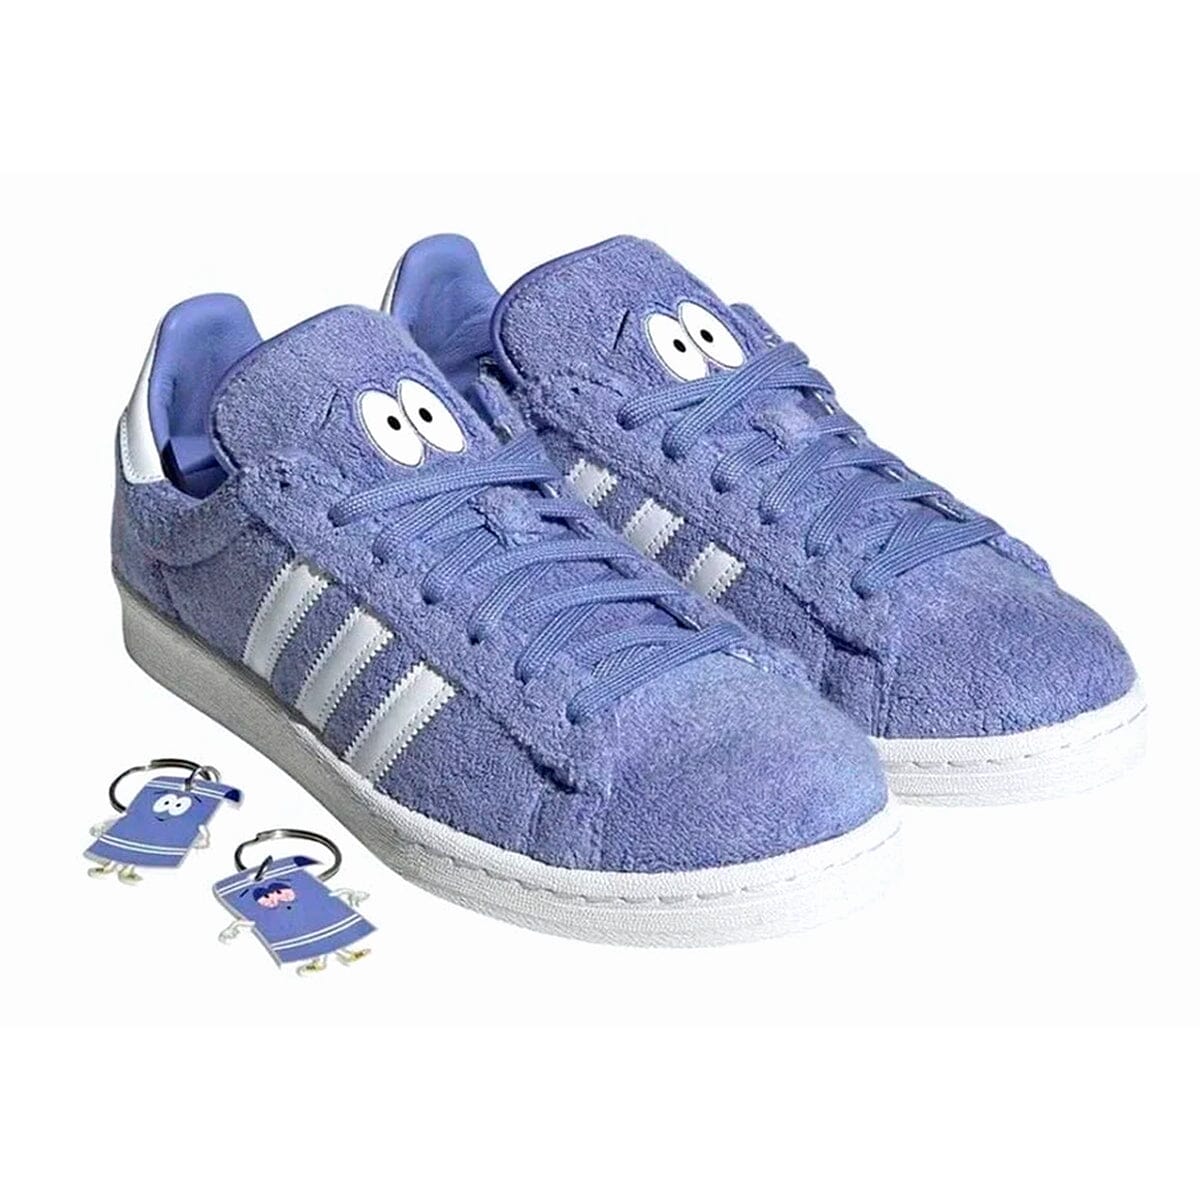 Adidas Campus 80s South Park Towelie Adidas Blizz Sneakers 